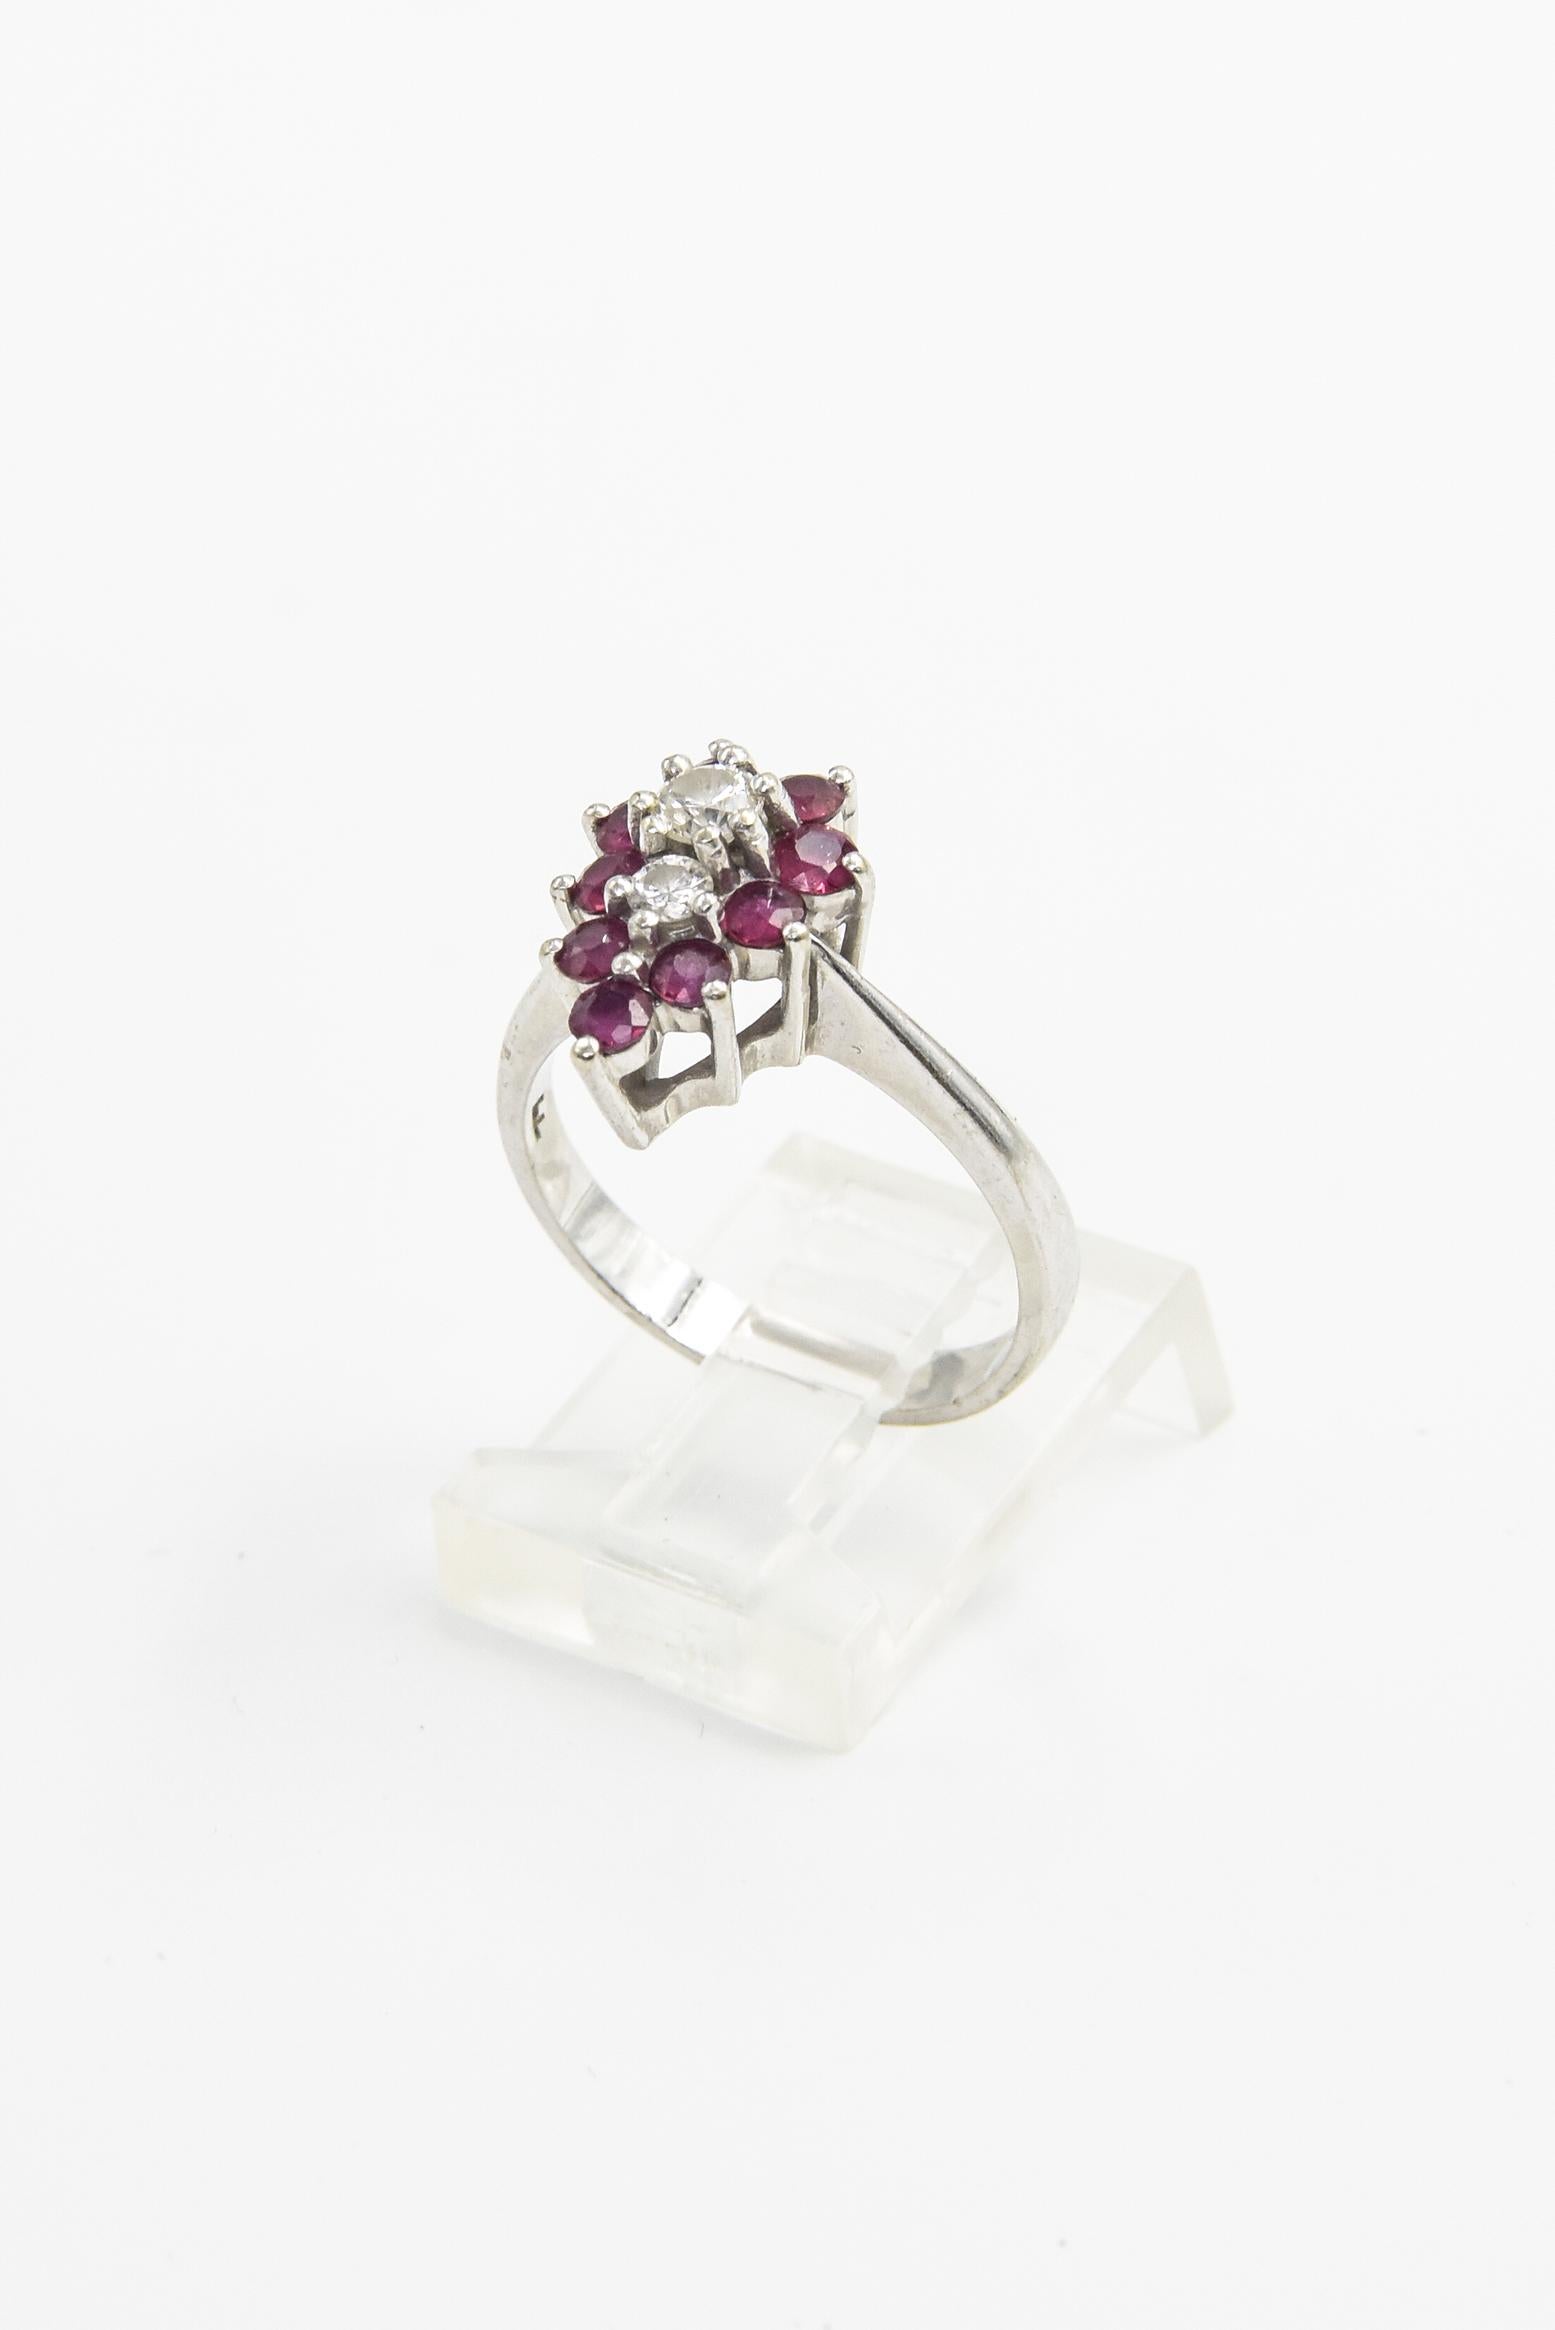 Lovely 14k white gold ruby and diamond cluster ring featuring .15 carat and .07 carat approximate weight diamond centrally set between between 9 prong set rubies.  Marked 14k.
US size 6.5.